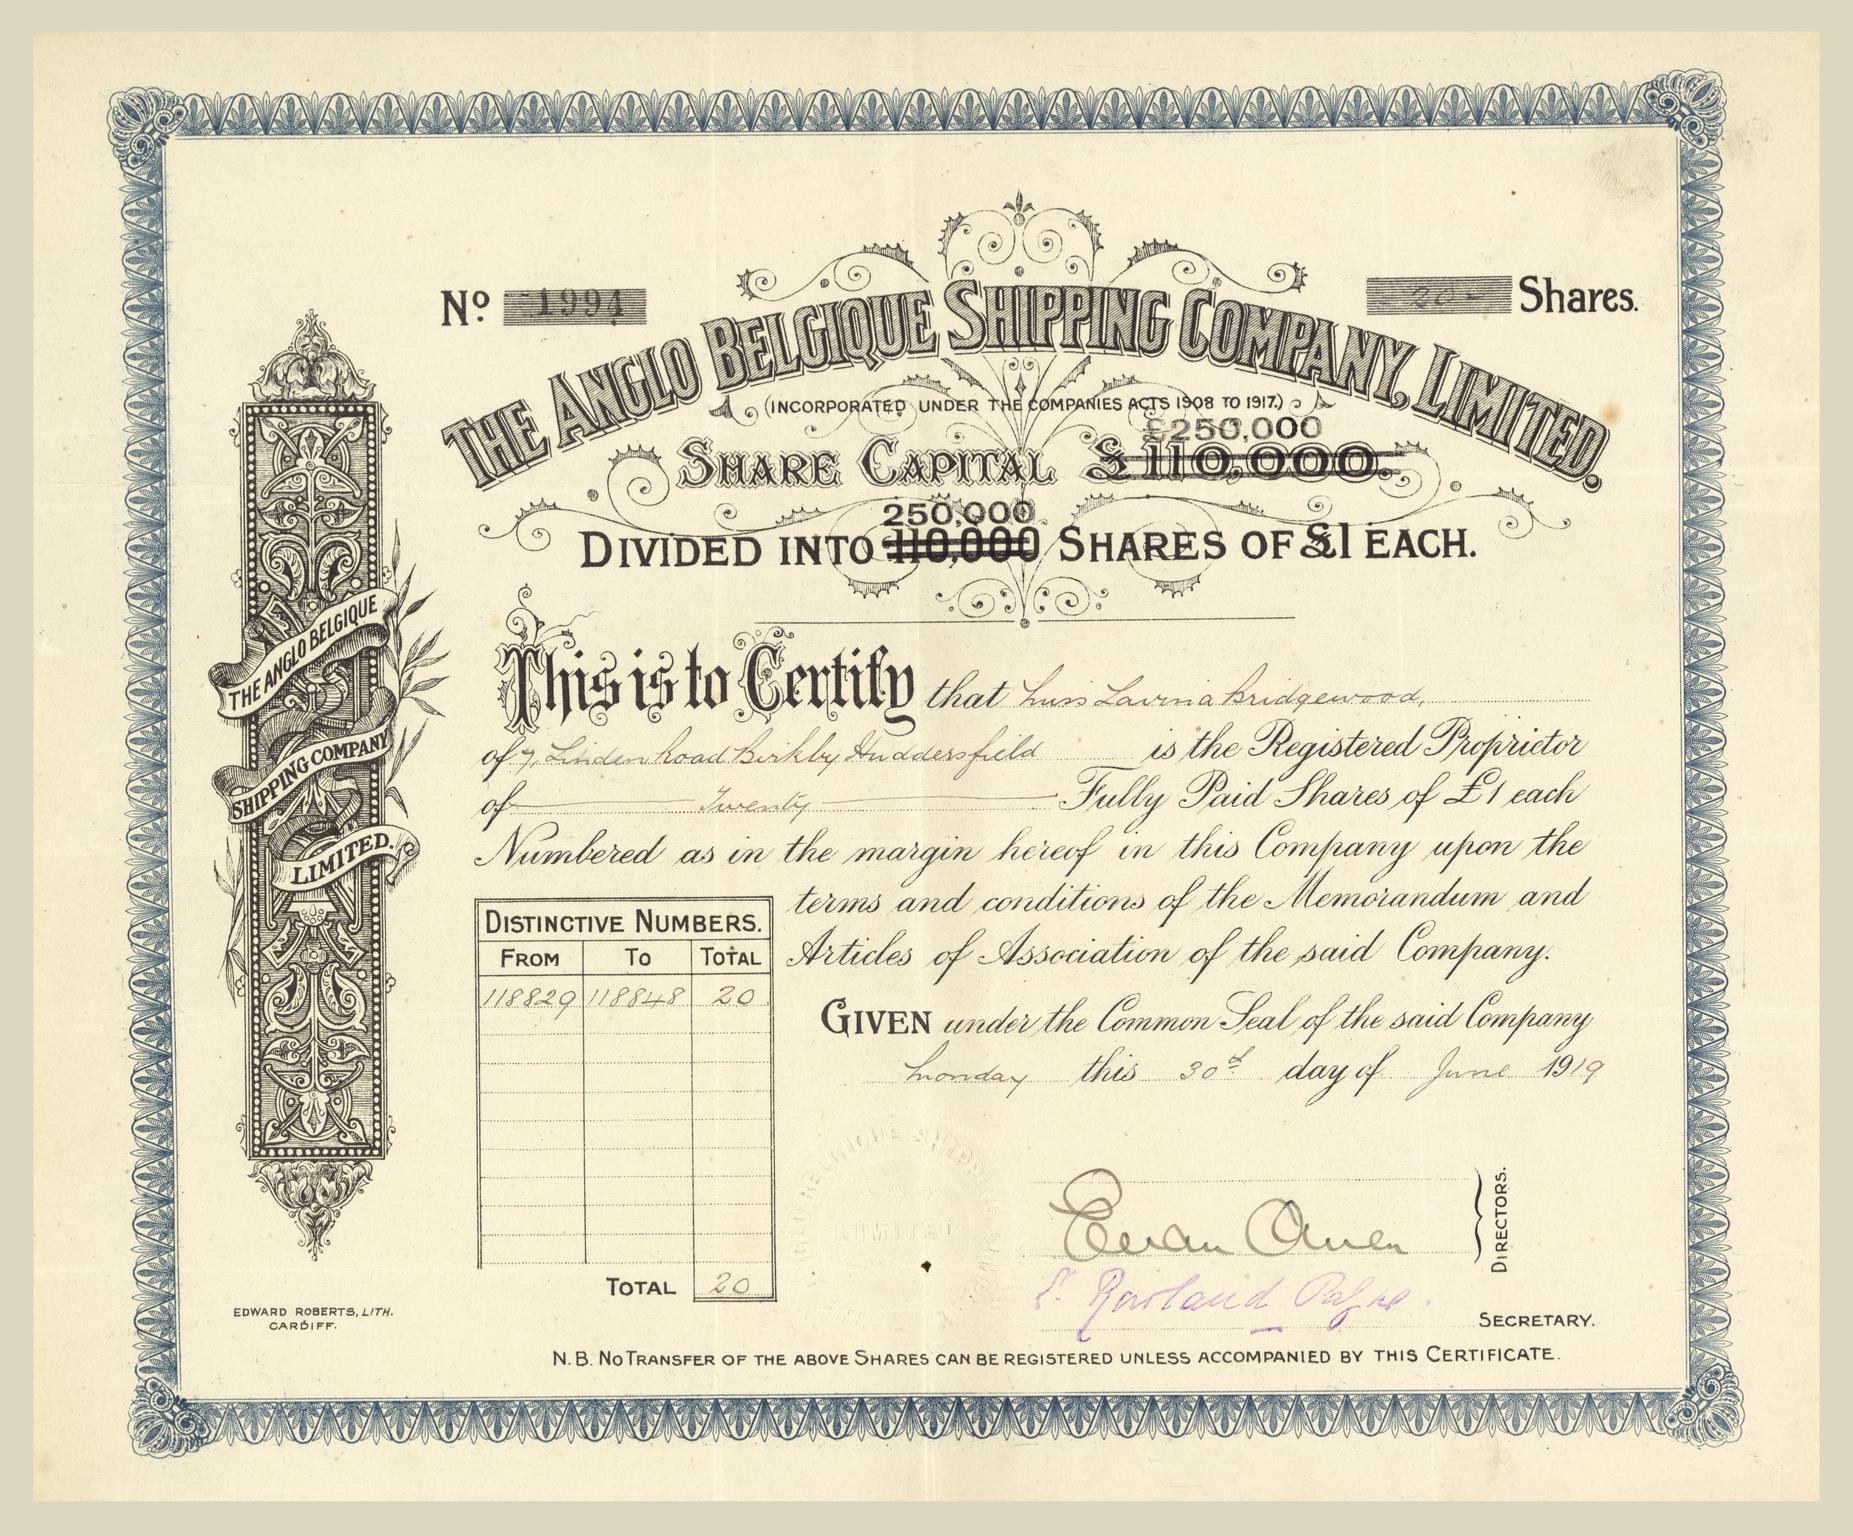 Anglo-Belgique Shipping Co. Ltd., share certificate